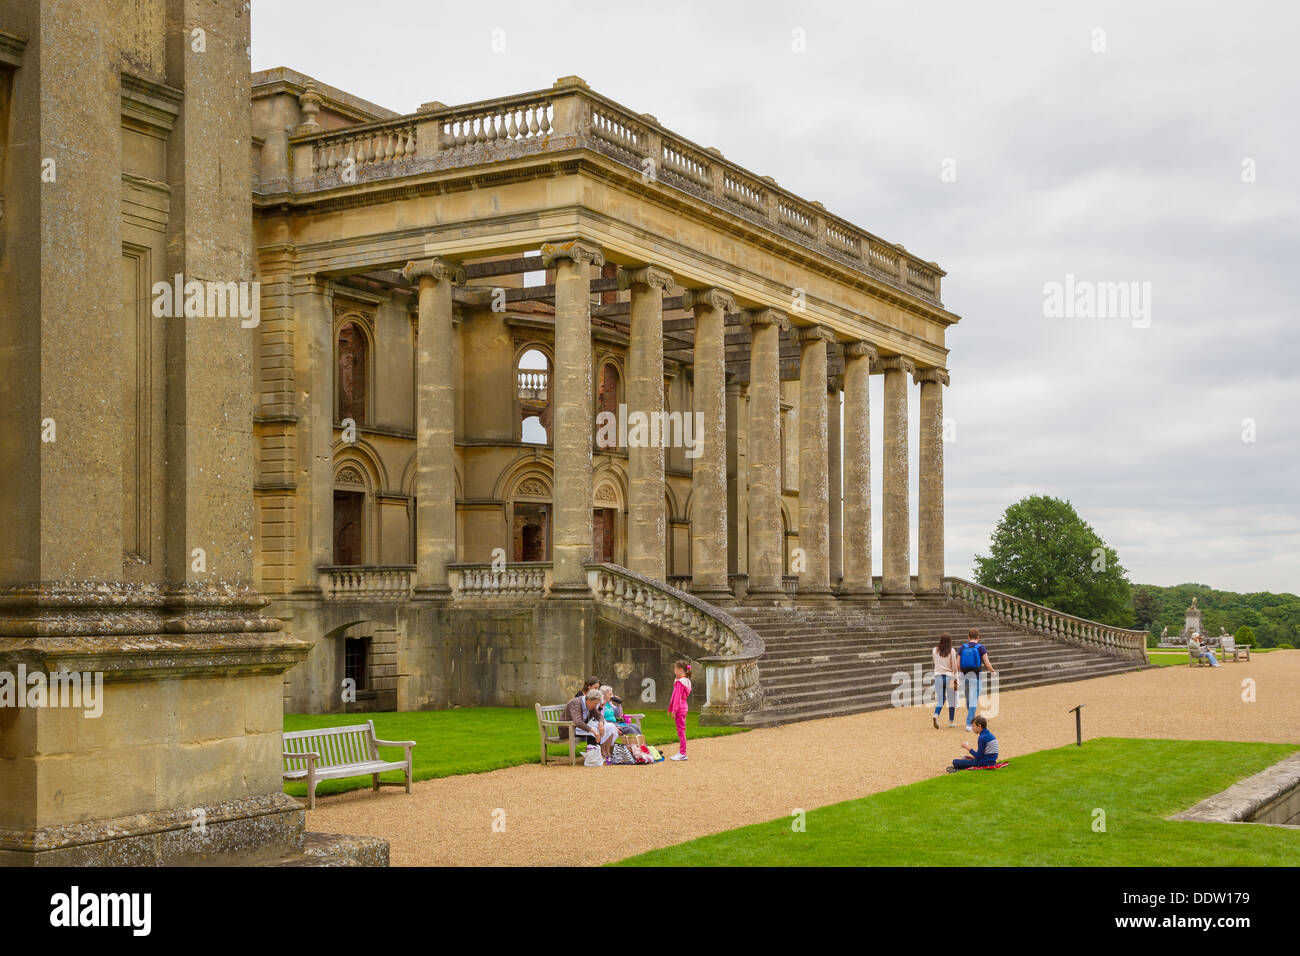 The South Portico of the ruins of Witley Court in Worcestershire, England. Stock Photo